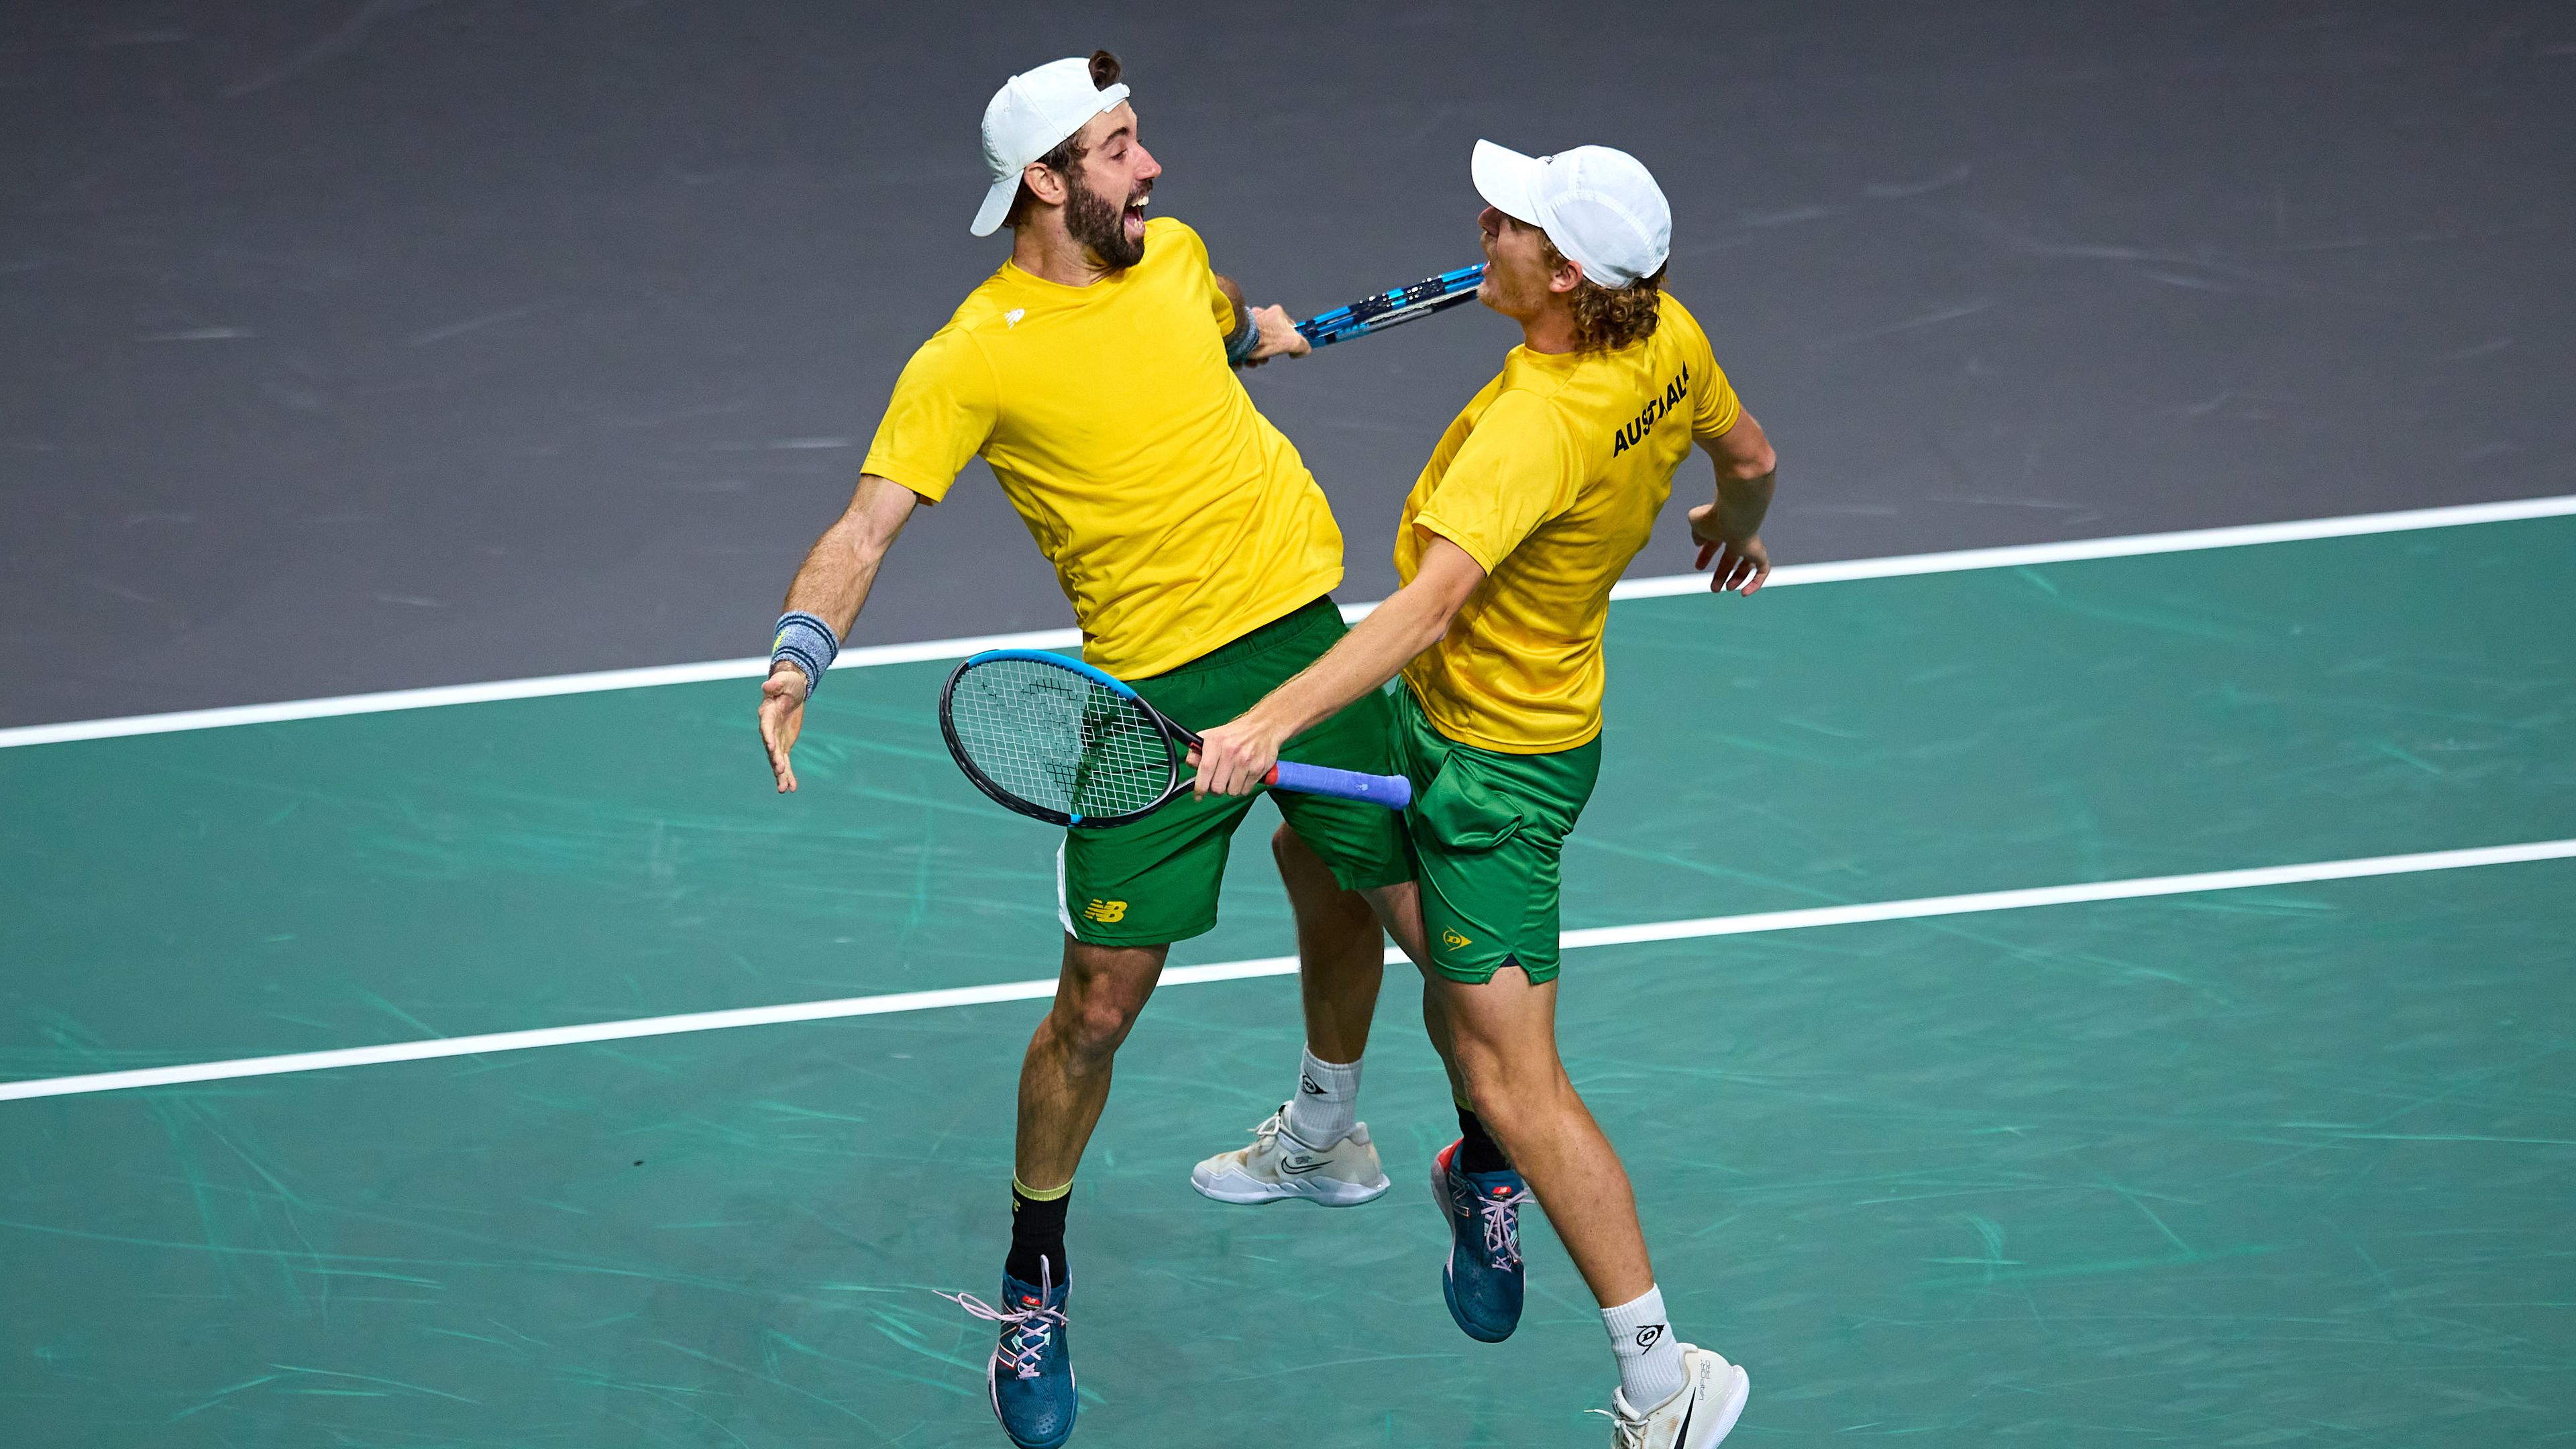 Australia rally from a rubber down to defeat Croatia to make first Davis Cup final since 2003